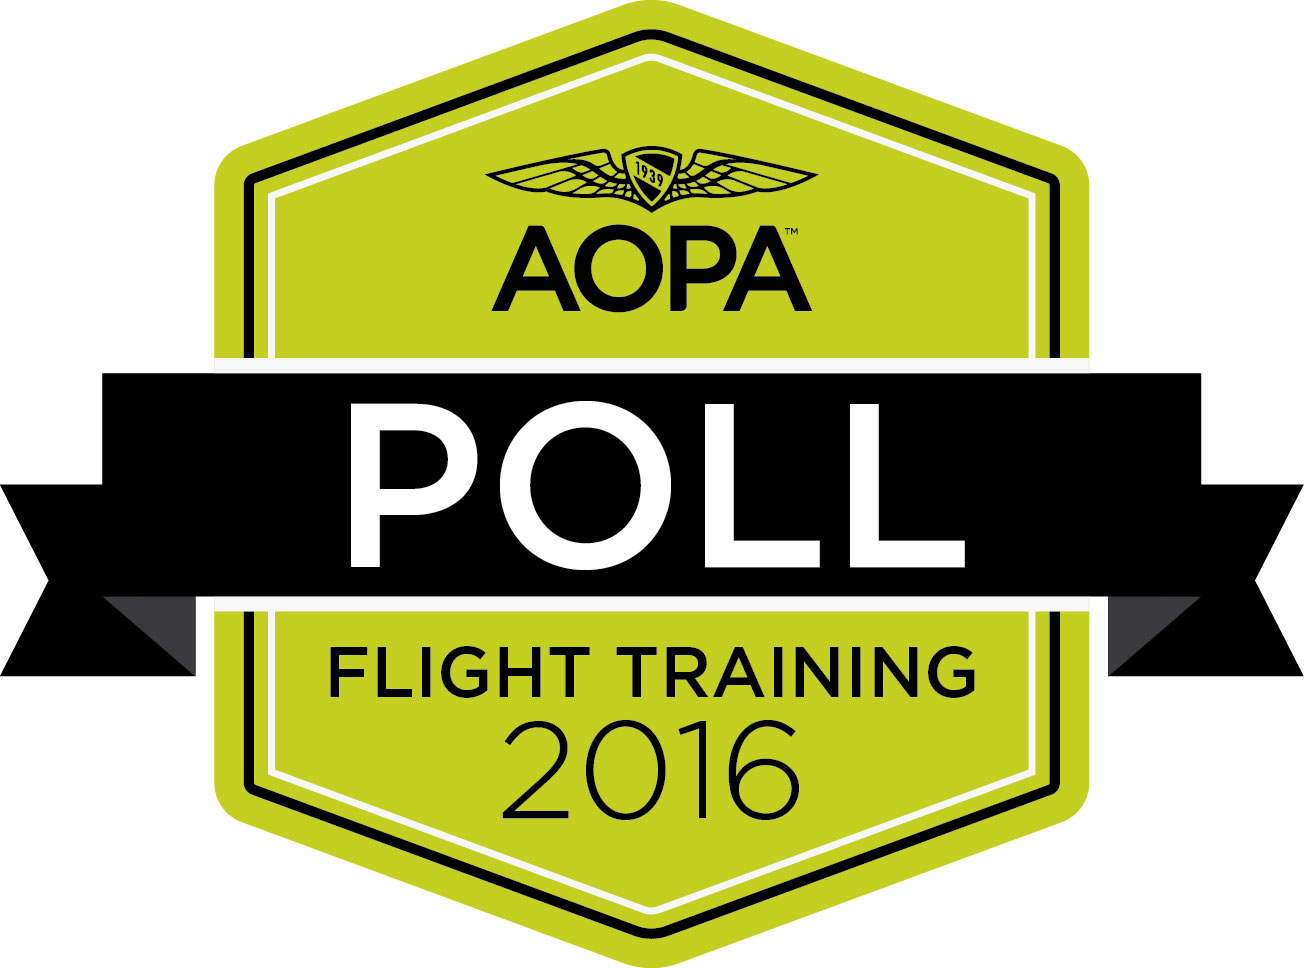 Click here to take the Flight Training Poll.